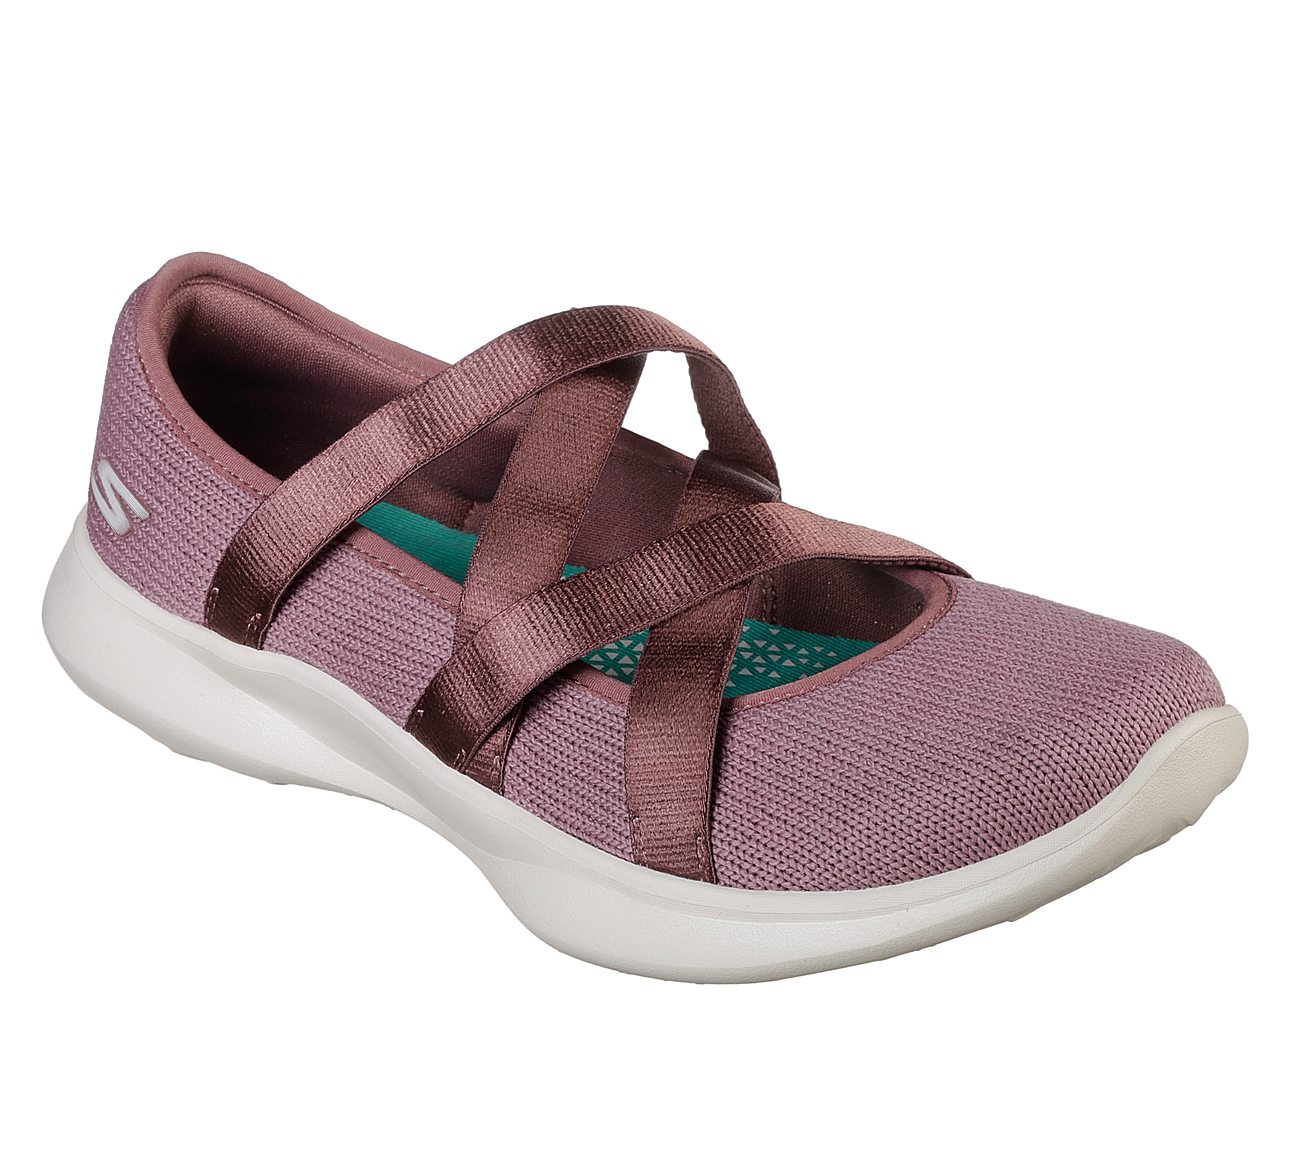 Serene - Elation YOU by skechers Shoes